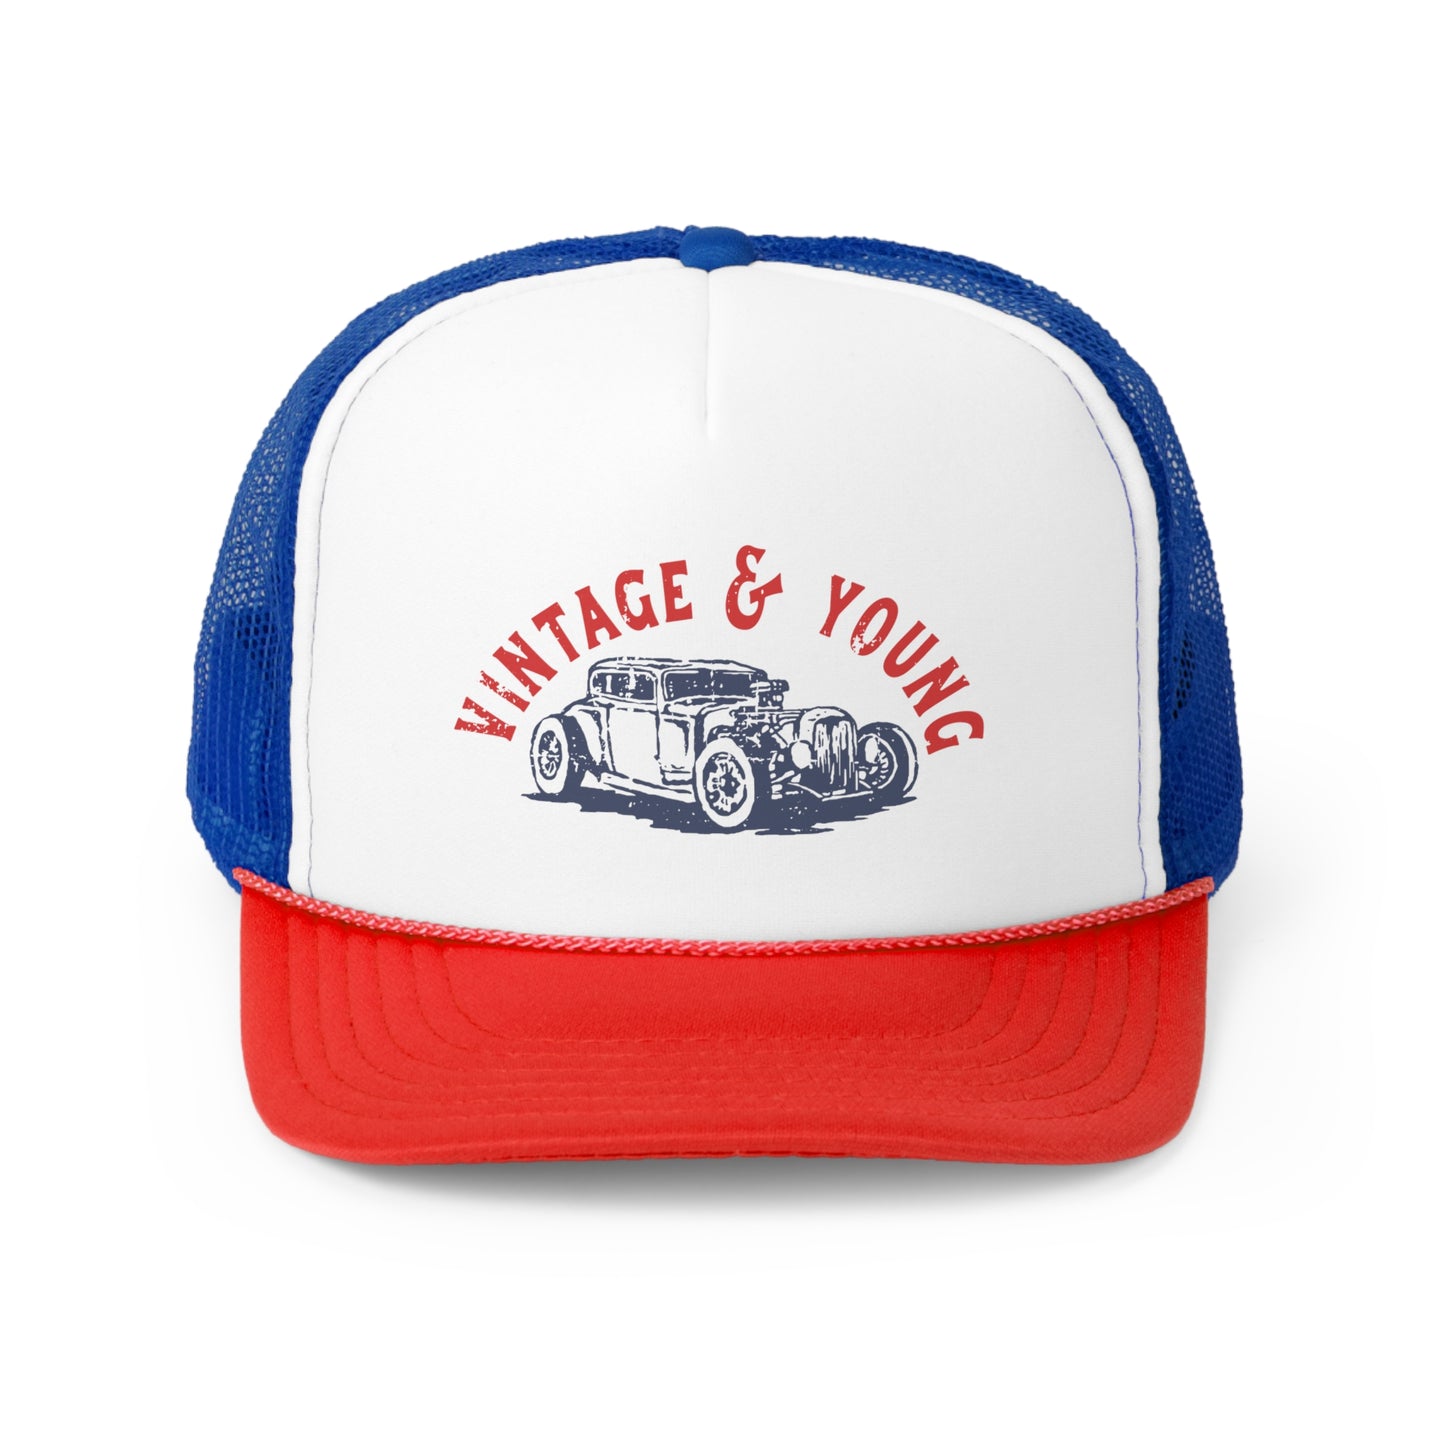 Red White and Blue Hot Rod Trucker Cap